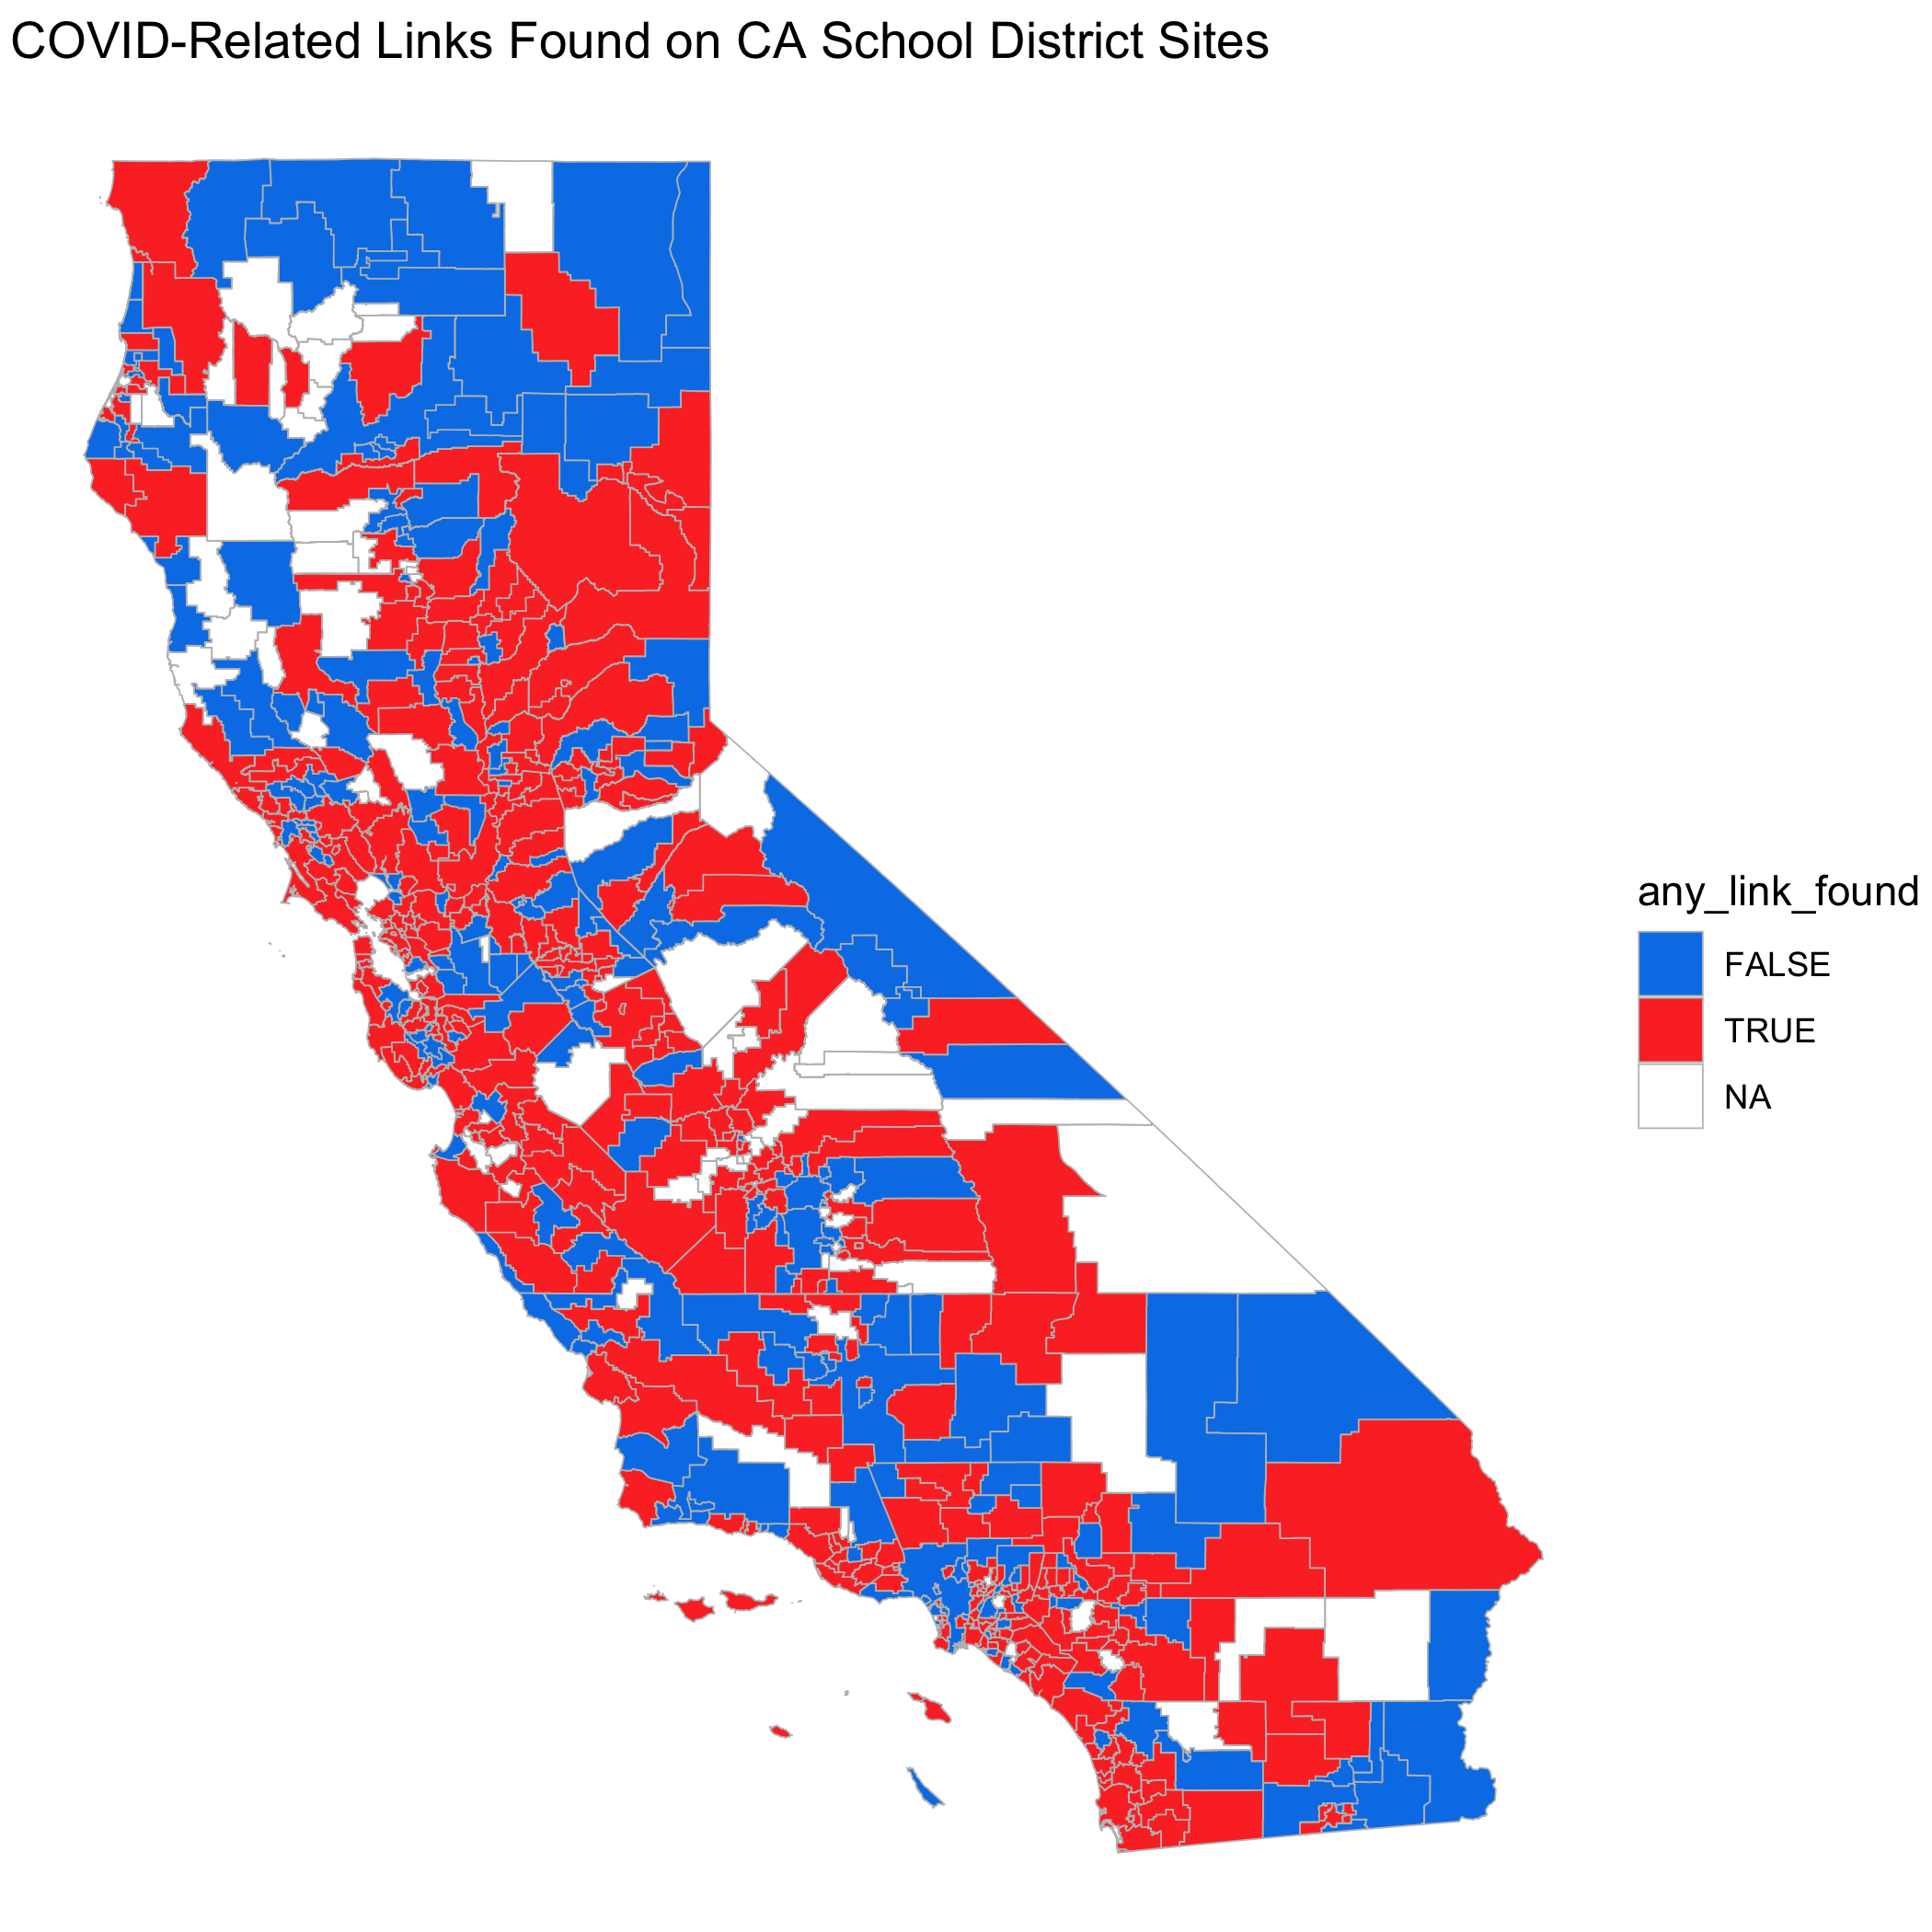 Map of California school districts showing whether or not they contained COVID-related links on their website